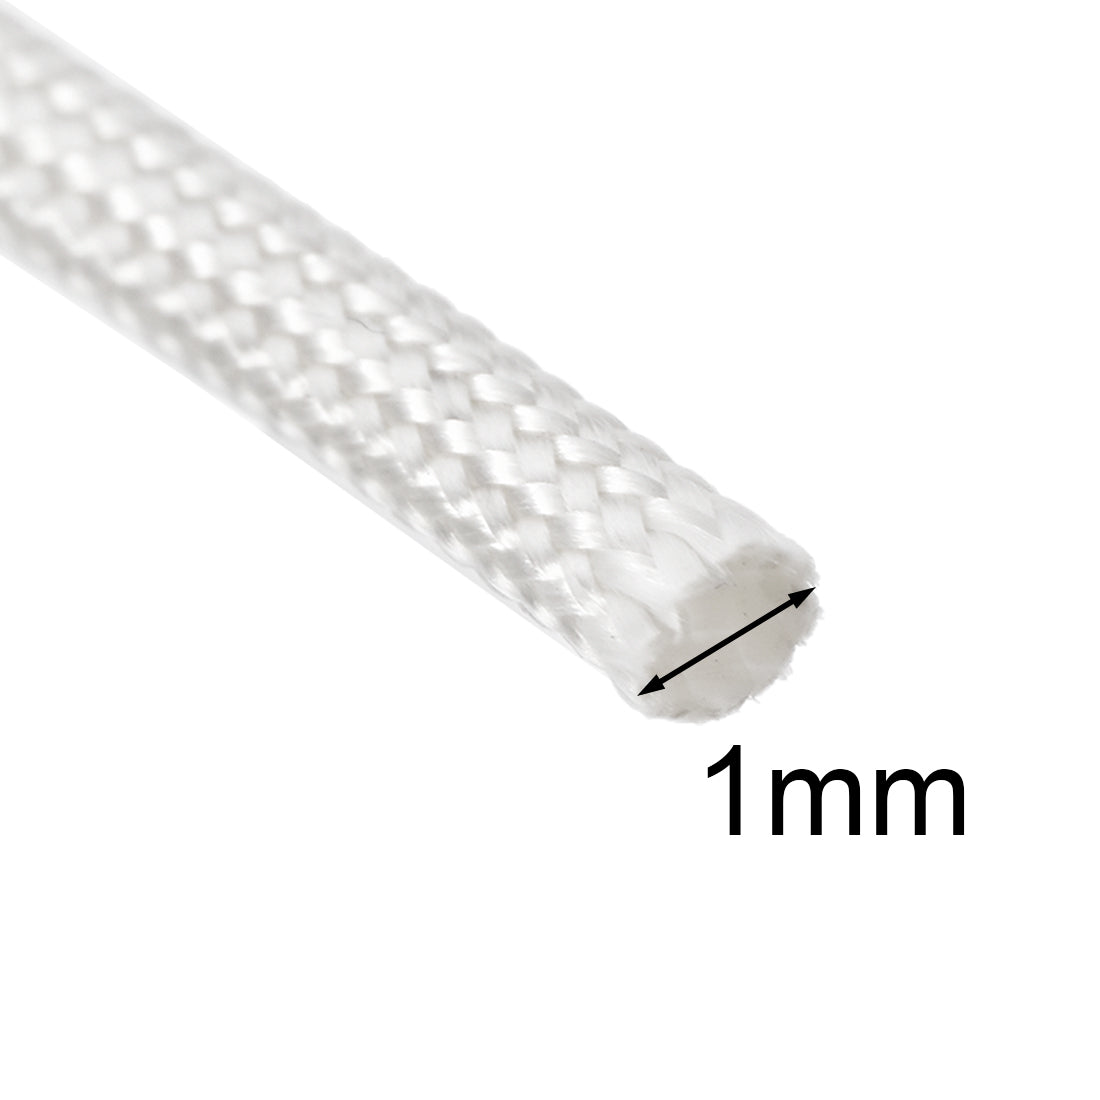 uxcell Uxcell Insulation Cable Protector, 33Ft-1mm High TEMP Silicone Fiberglass Sleeve White